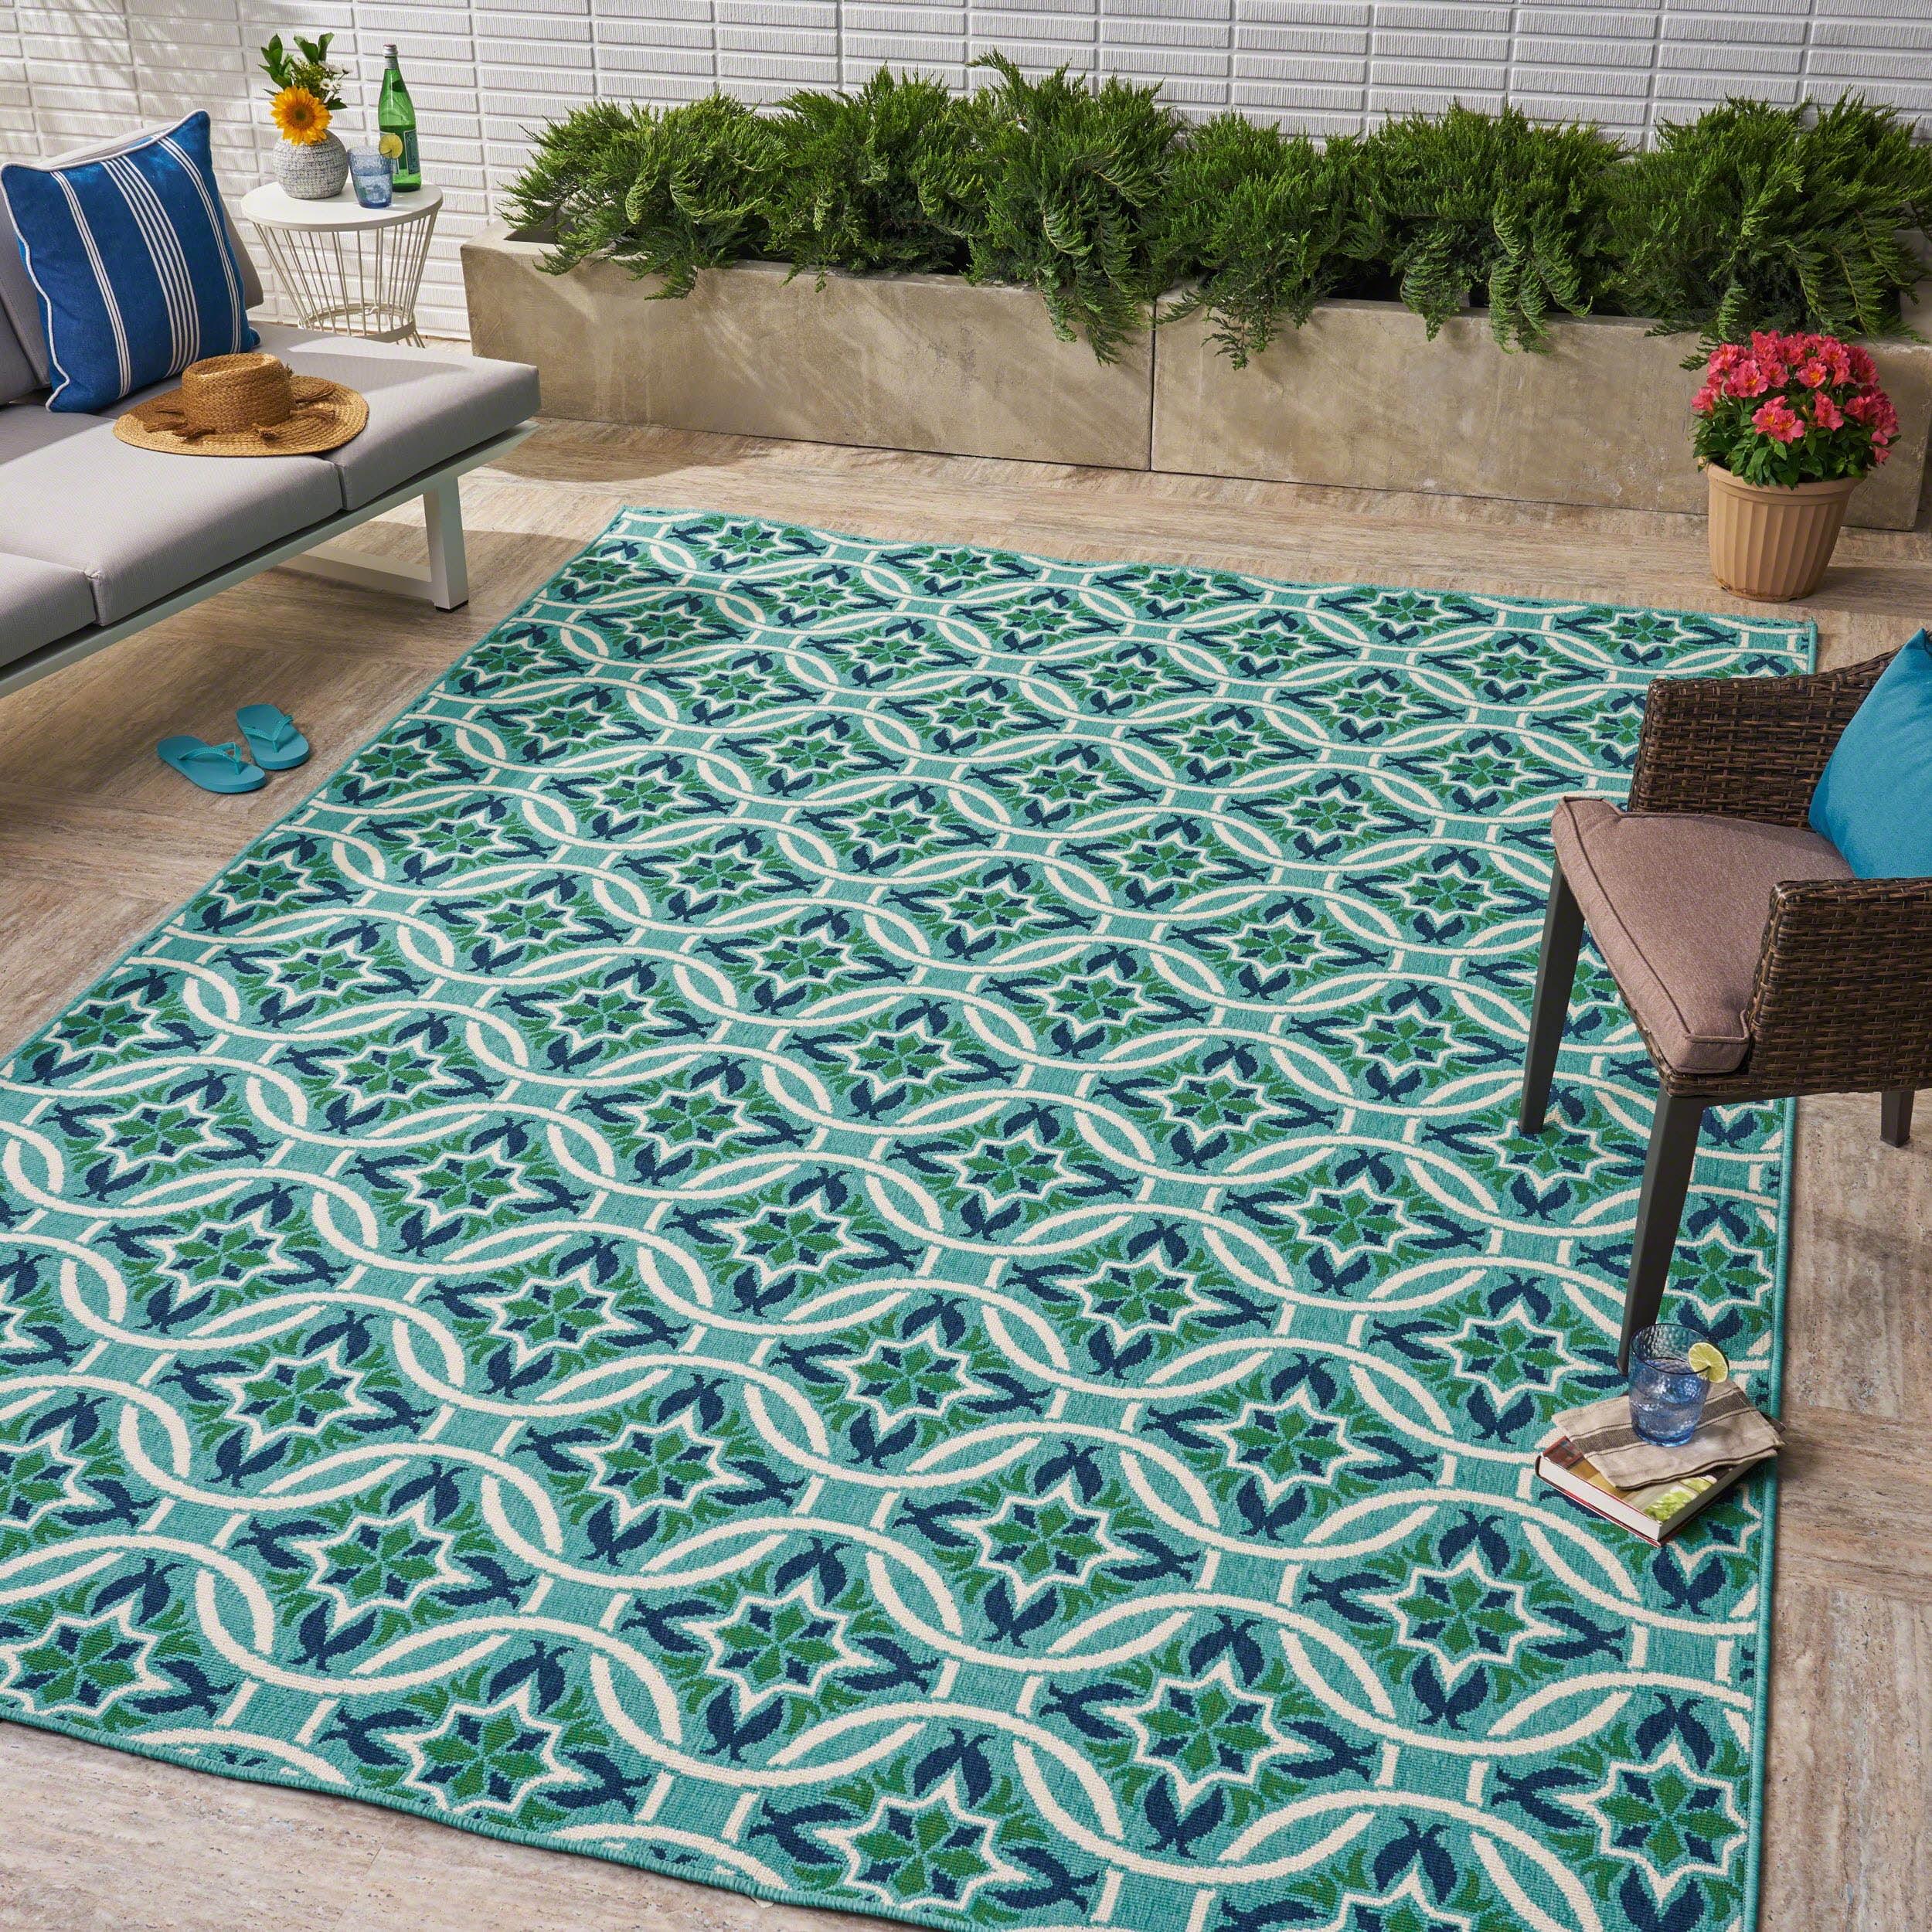 Outdoor Geometric 8 X 11 Area Rug Blue, Green And Blue Rugs